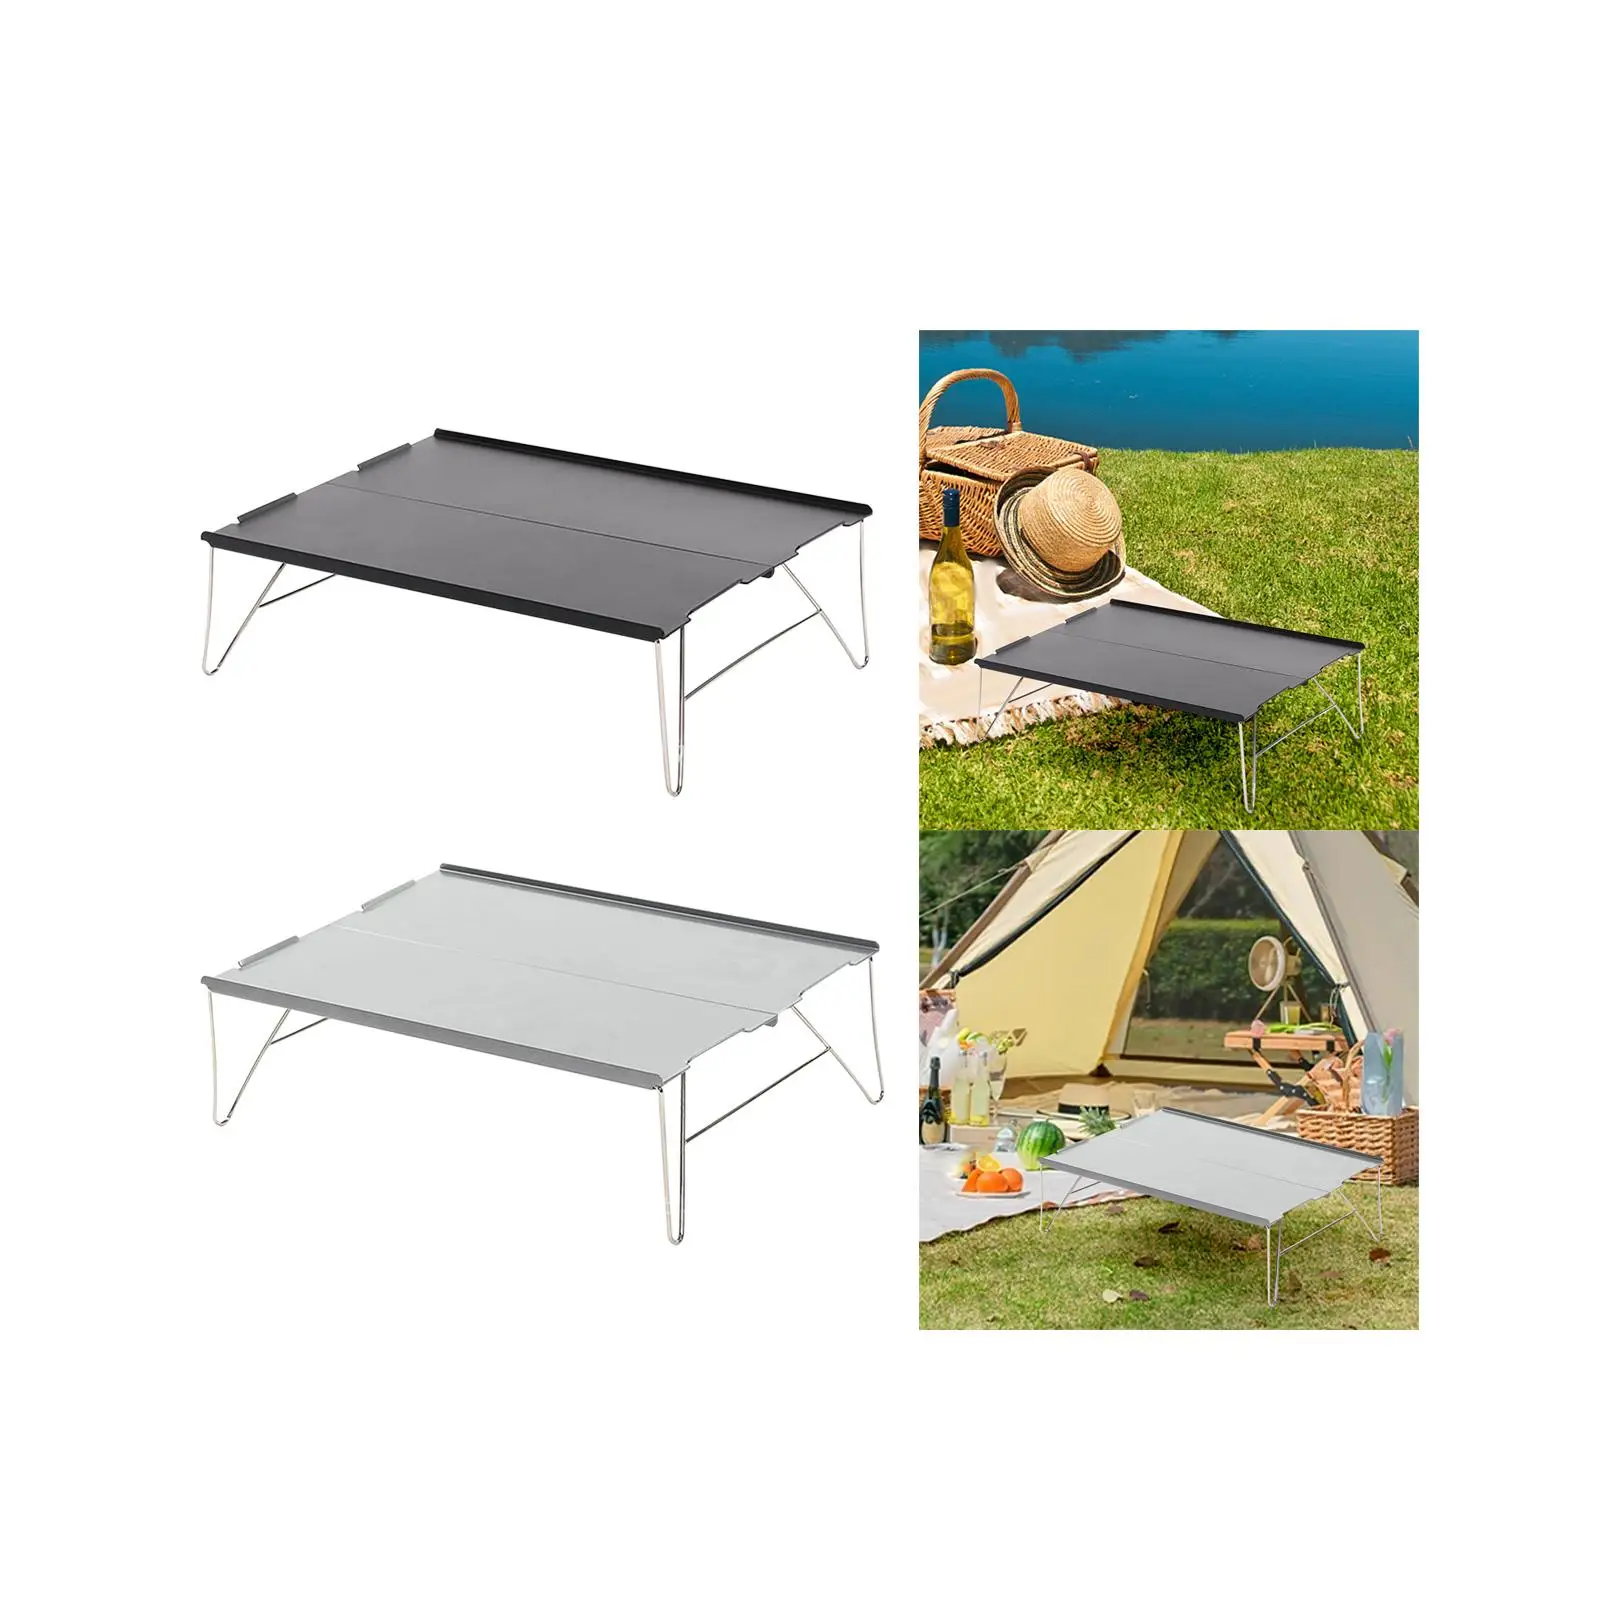 Small Camping Table Tea Table Square Lightweight Computer Desk Multifunctional Aluminum Alloy Folding Table Portable for Garden